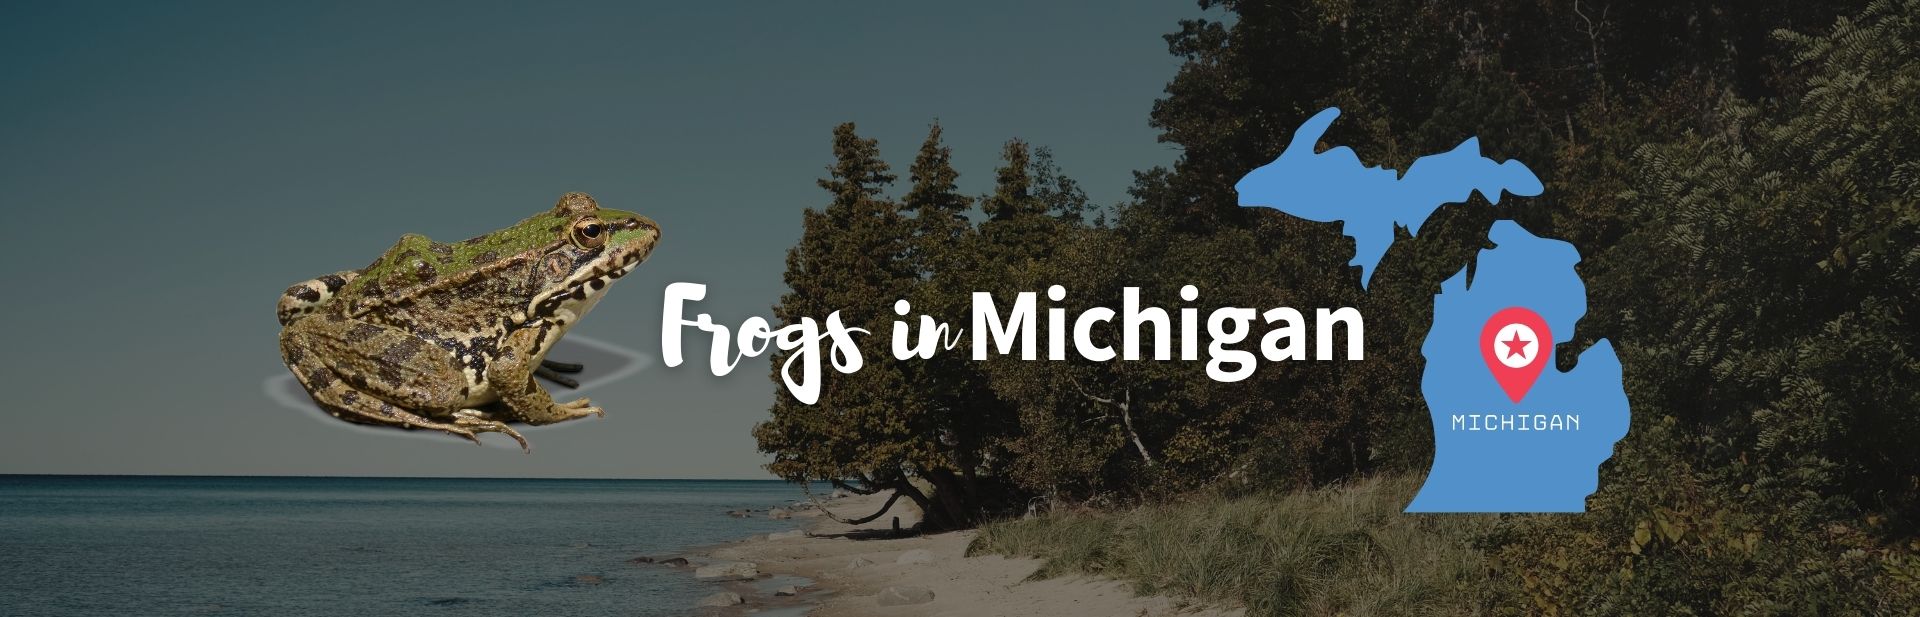 14 Frogs of Michigan: ID Guide with Photos and Calls